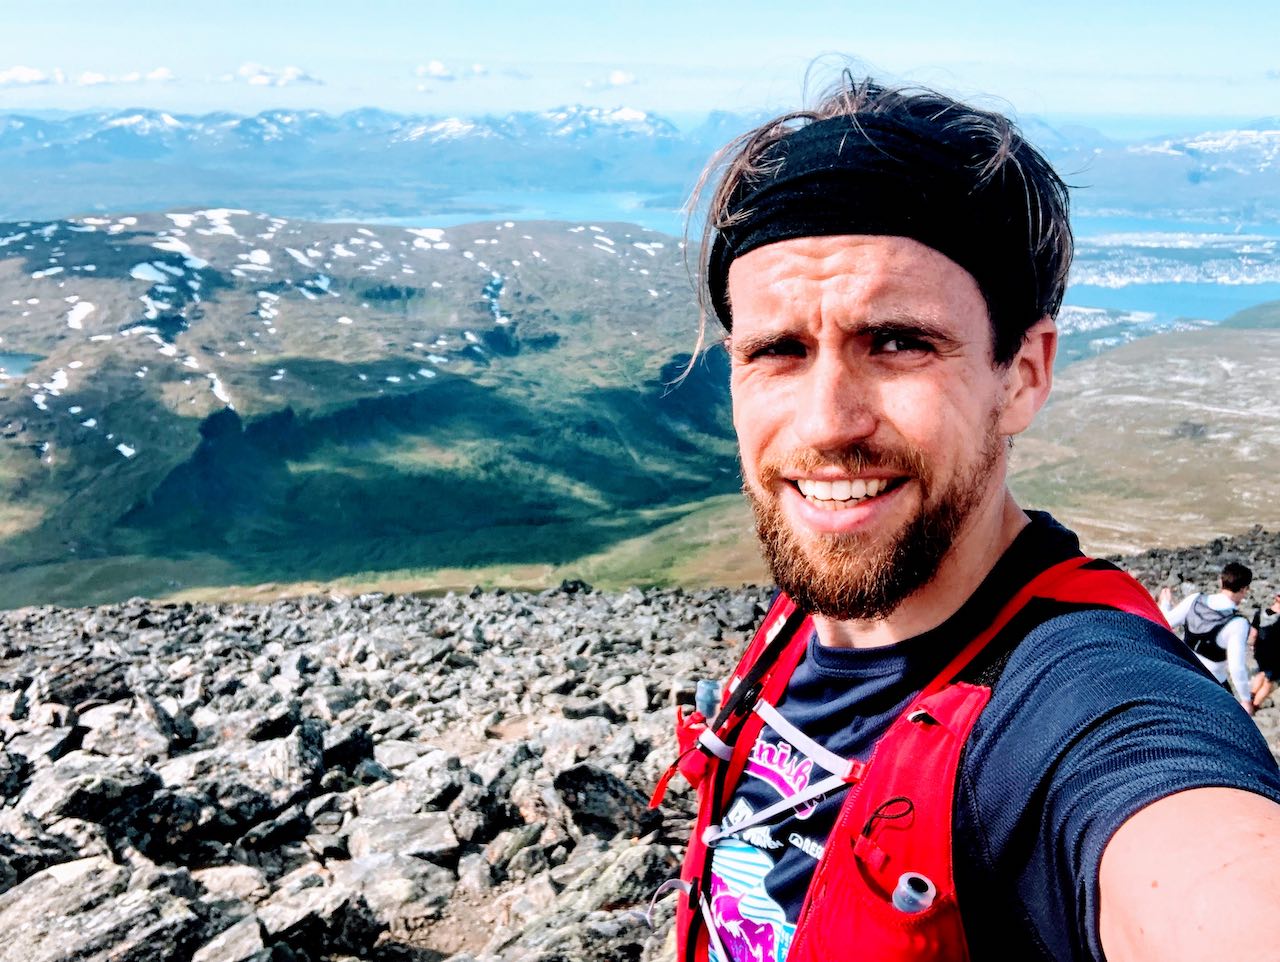 Obligatory selfie from the summit of Tromsdalstinden